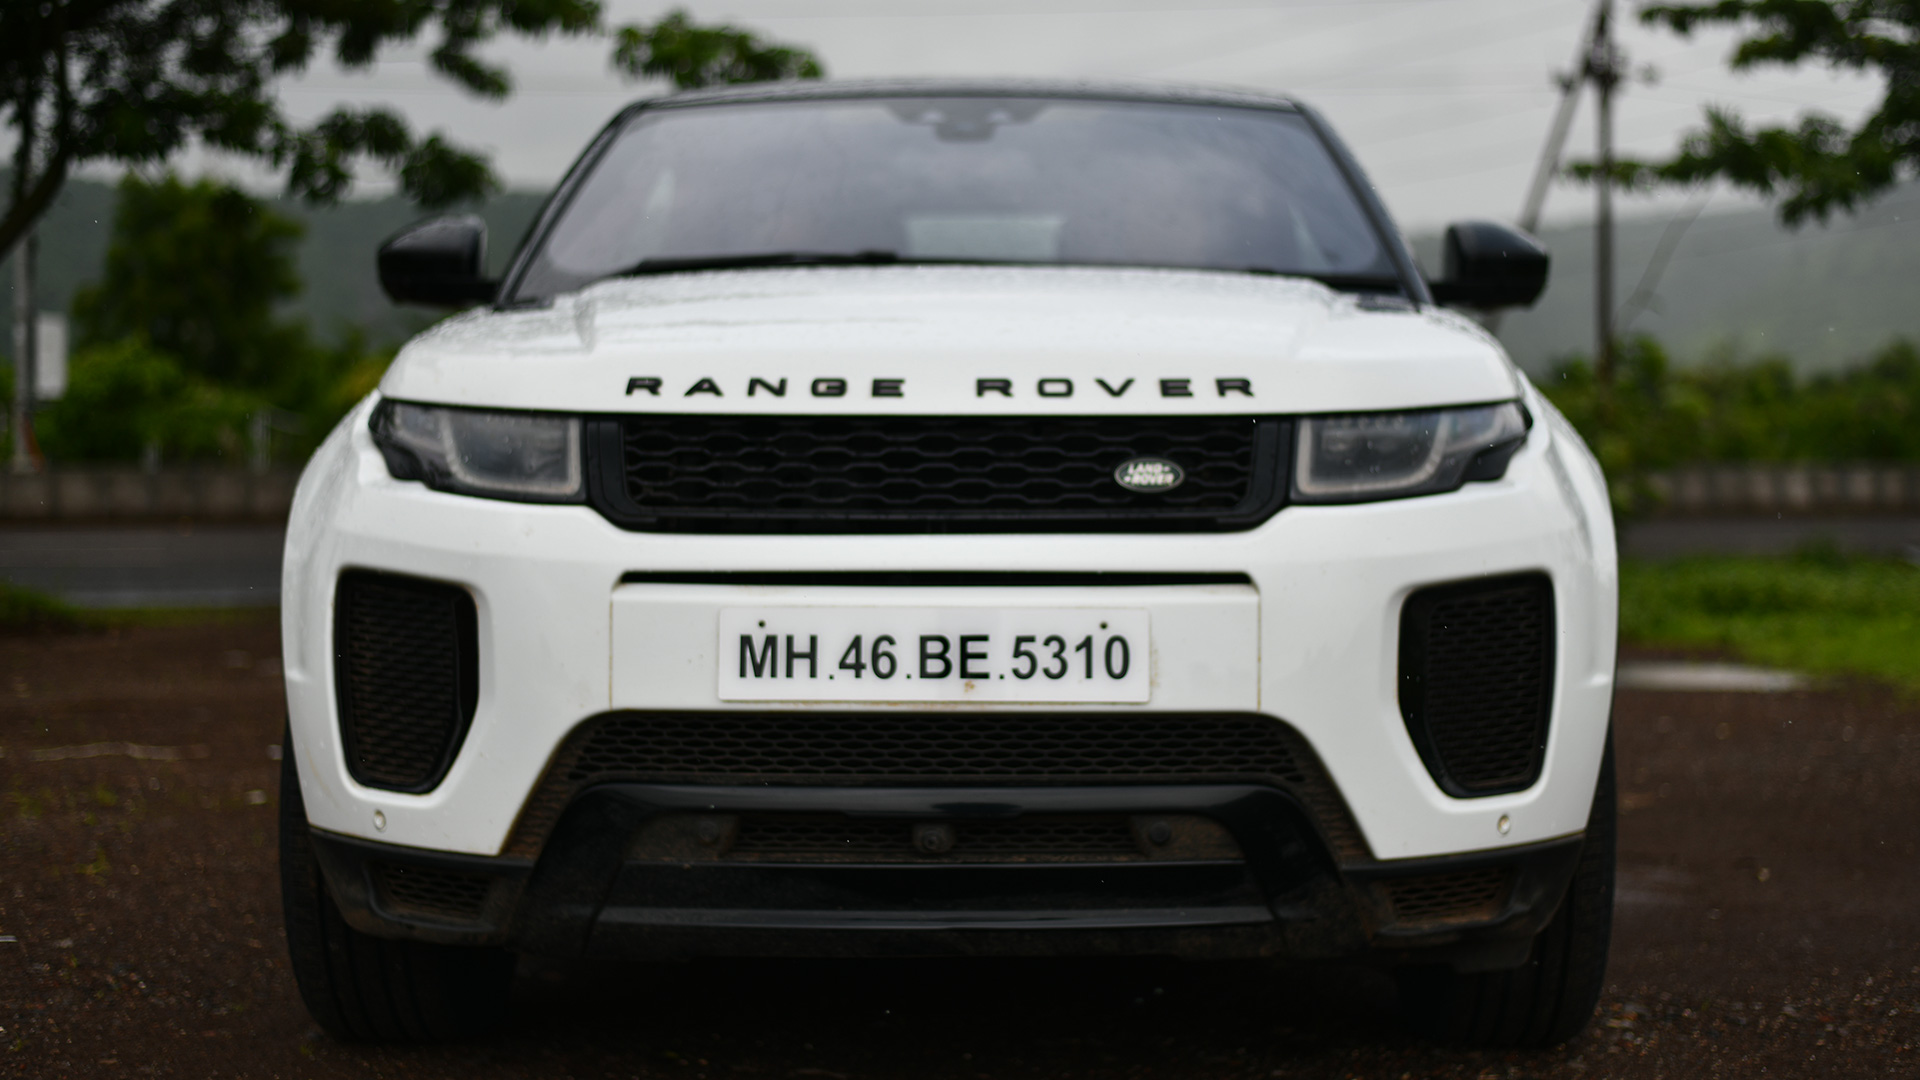 Land Rover Range Rover Evoque Convertible-2018-HSE Dynamic Petrol Compare